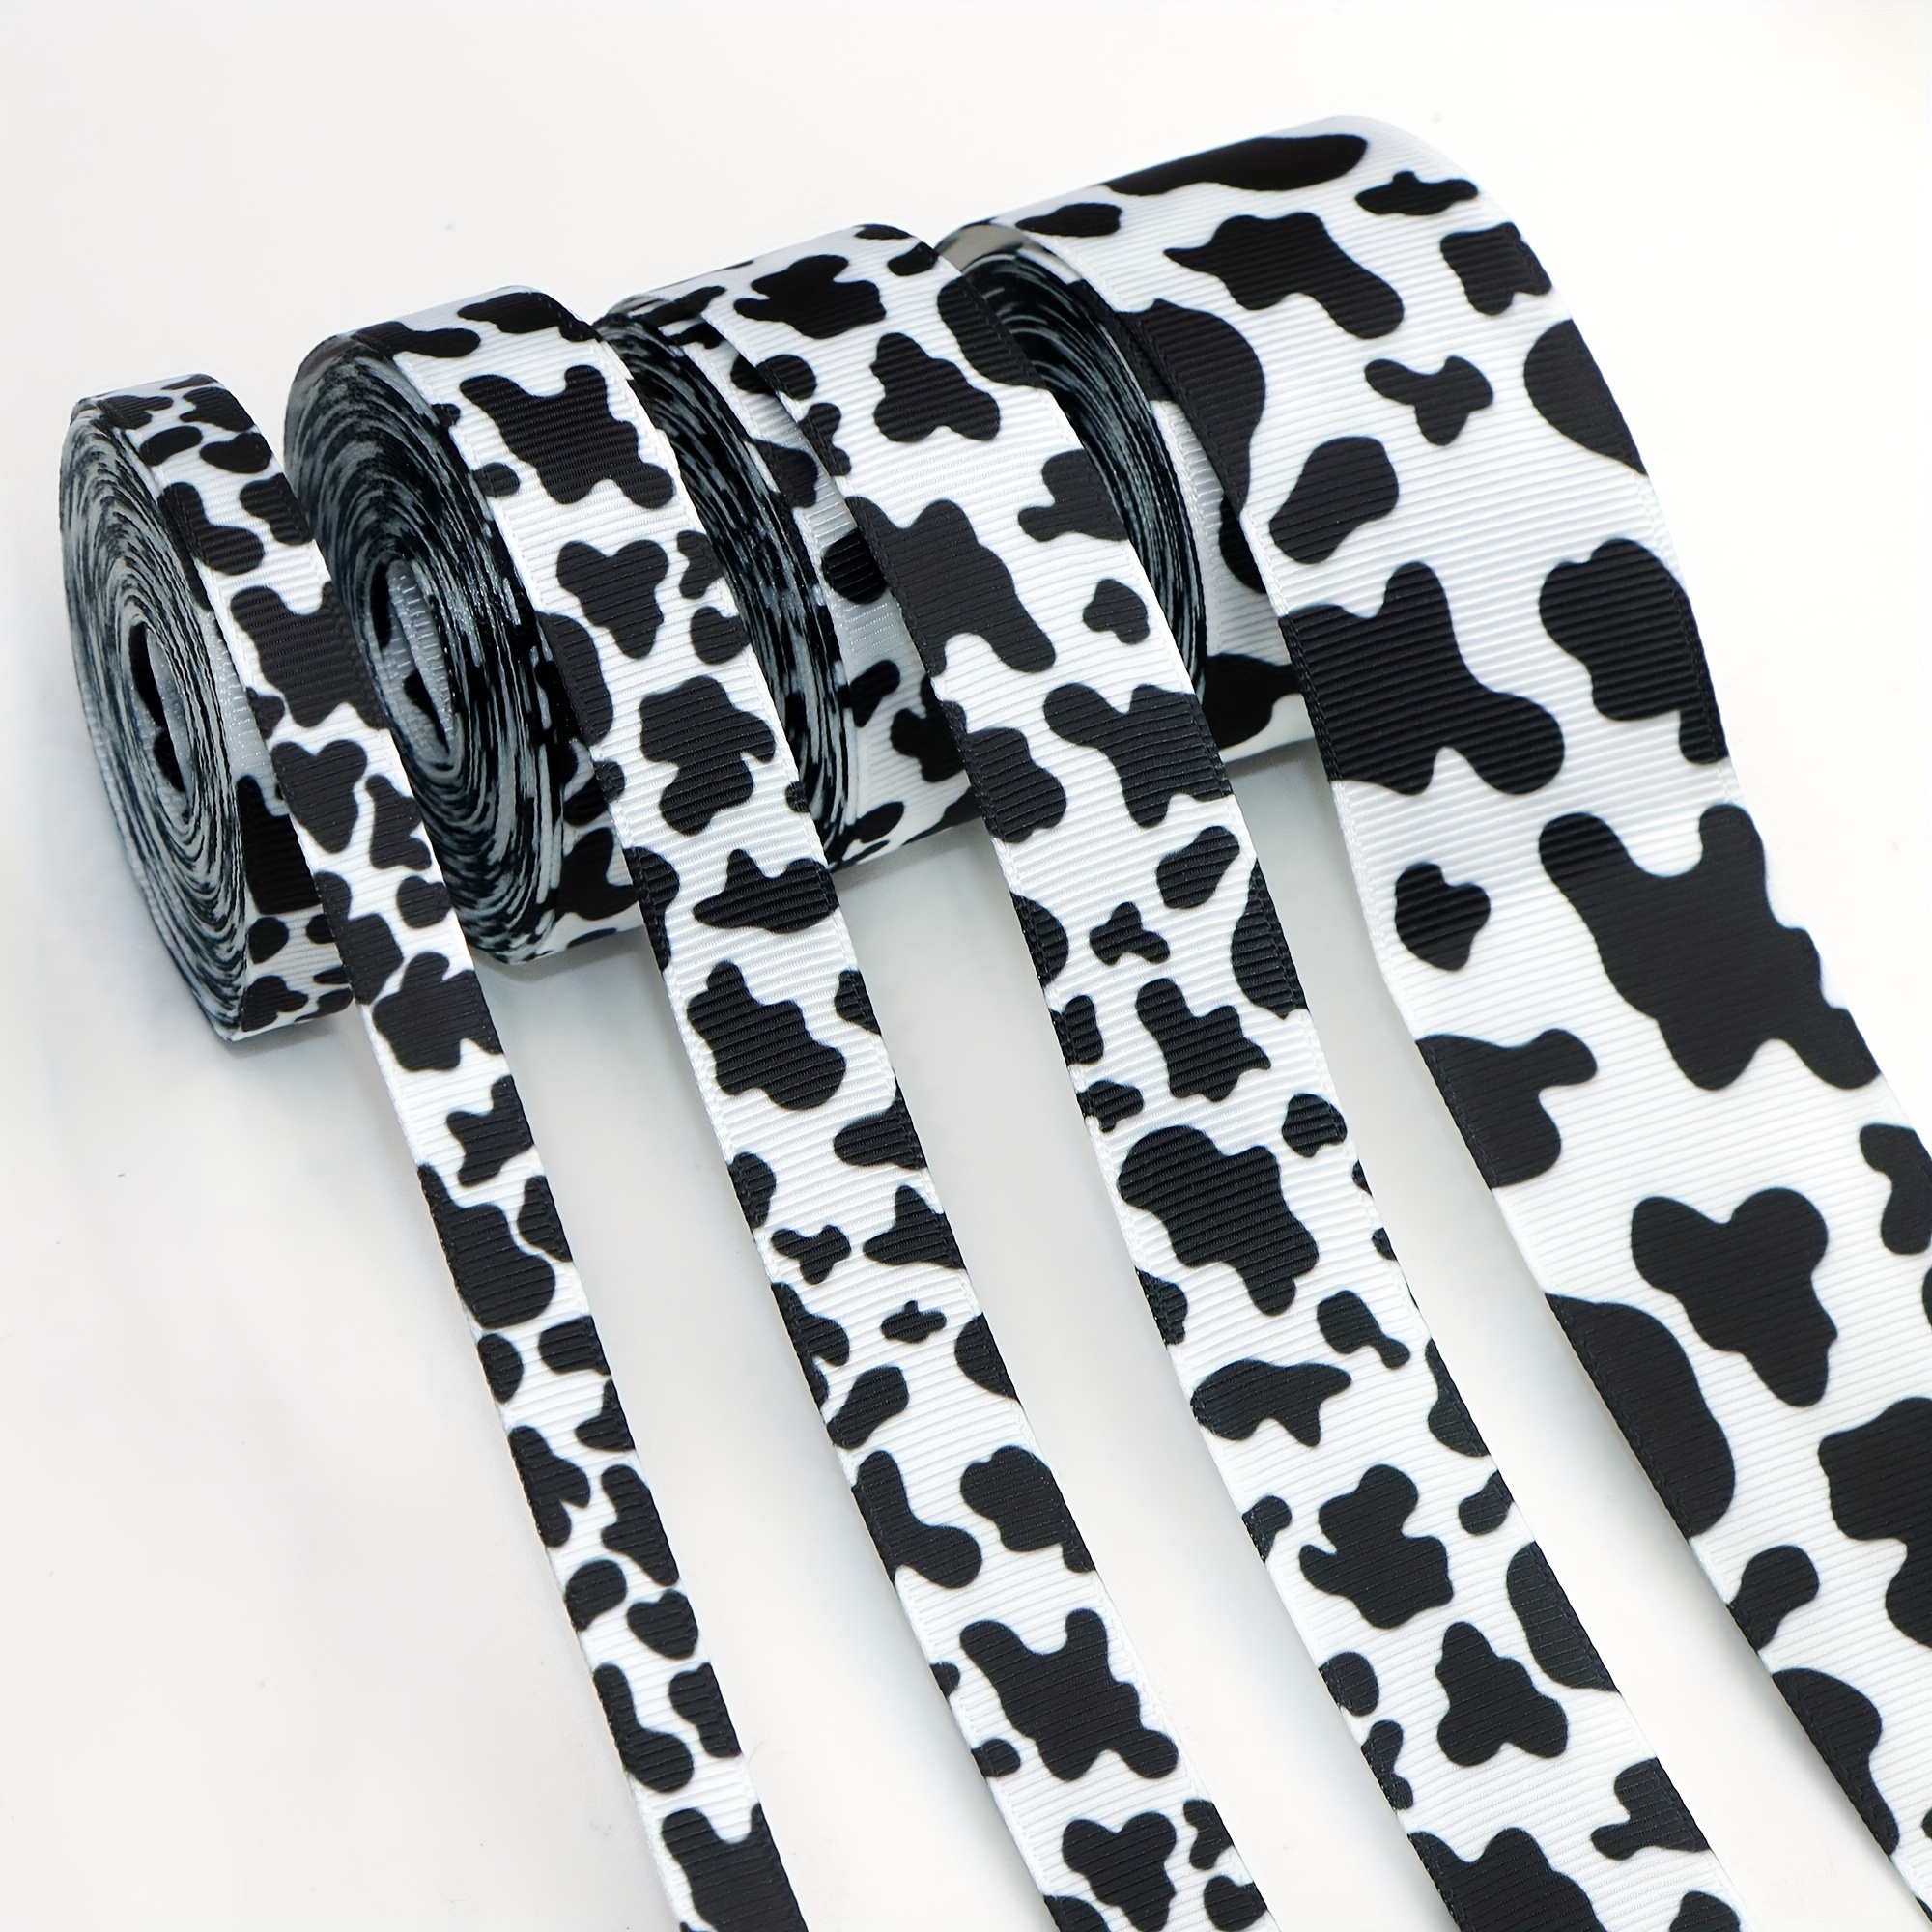 

4 Rolls, 5 Yards/roll 9mm/16mm/22mm/38mm Cow Printed Grosgrain Ribbon Set Black And White Cow Spot Pattern Ribbon For Gift Wrapping Ribbon Holiday Diy Craft Ribbons For Home Party Decor